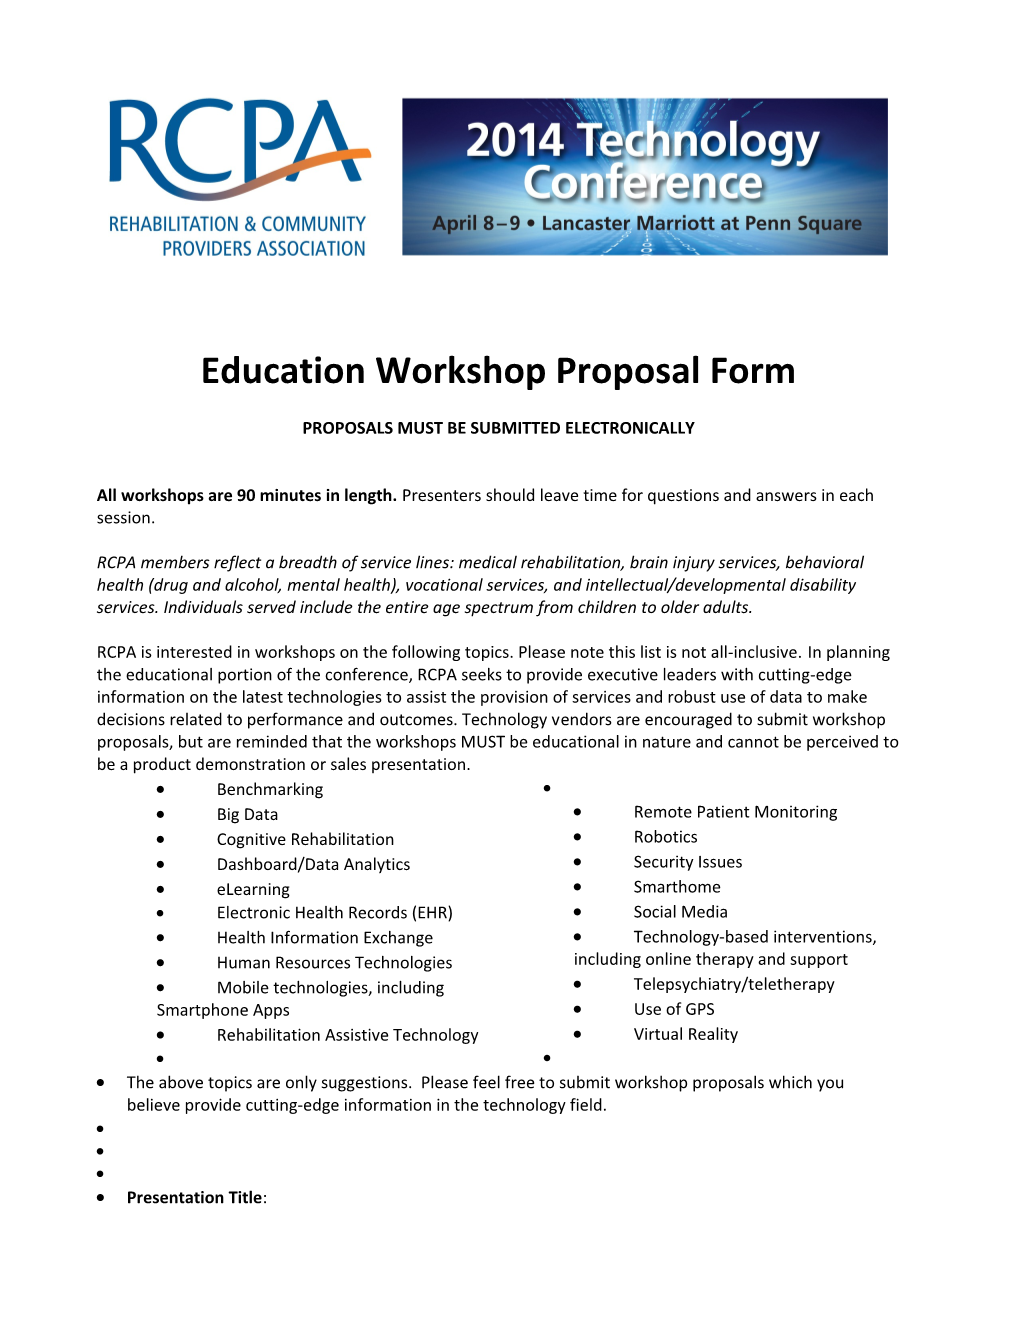 PCPA 2006 Conference Proposal Form